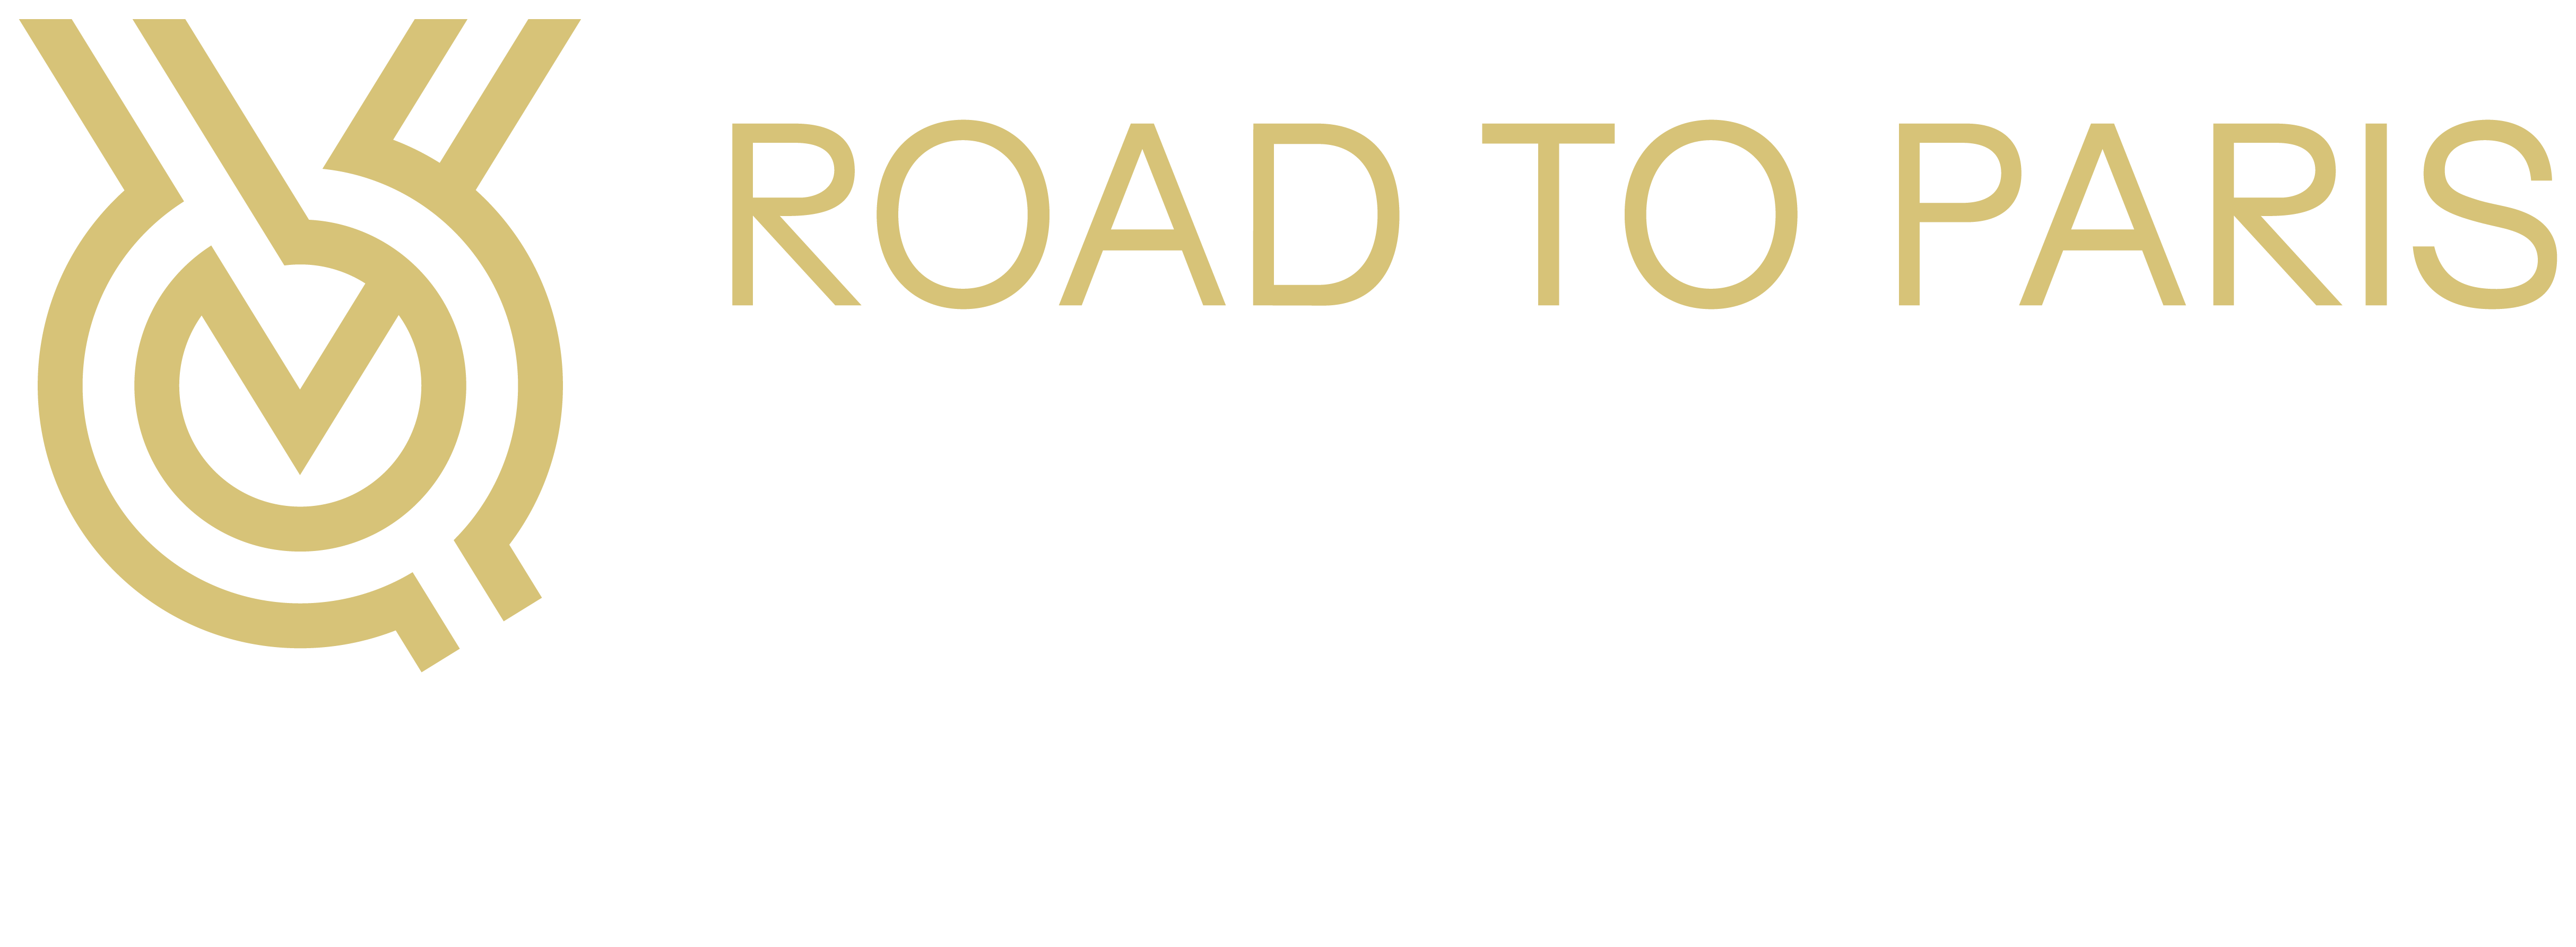 Volleyball Men's Olympic Qualifying Tournament: Brazil join USA, Japan,  Germany, Poland and Canada in securing Paris 2024 quotas